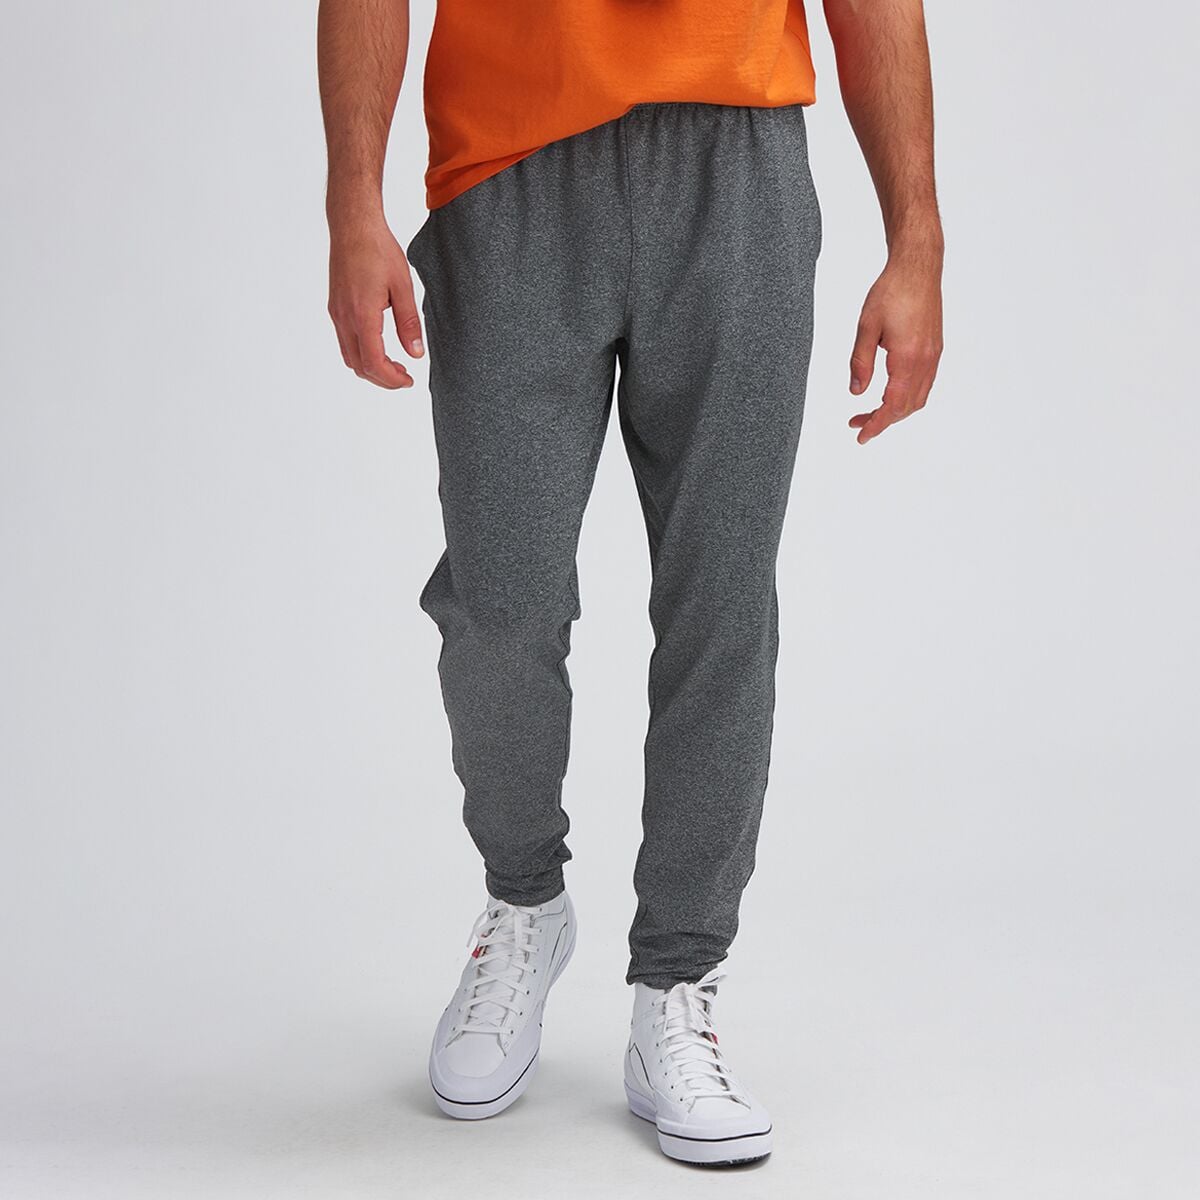 Stoic Tapered Performance Knit Pant - Past Season - Men's - Hike & Camp